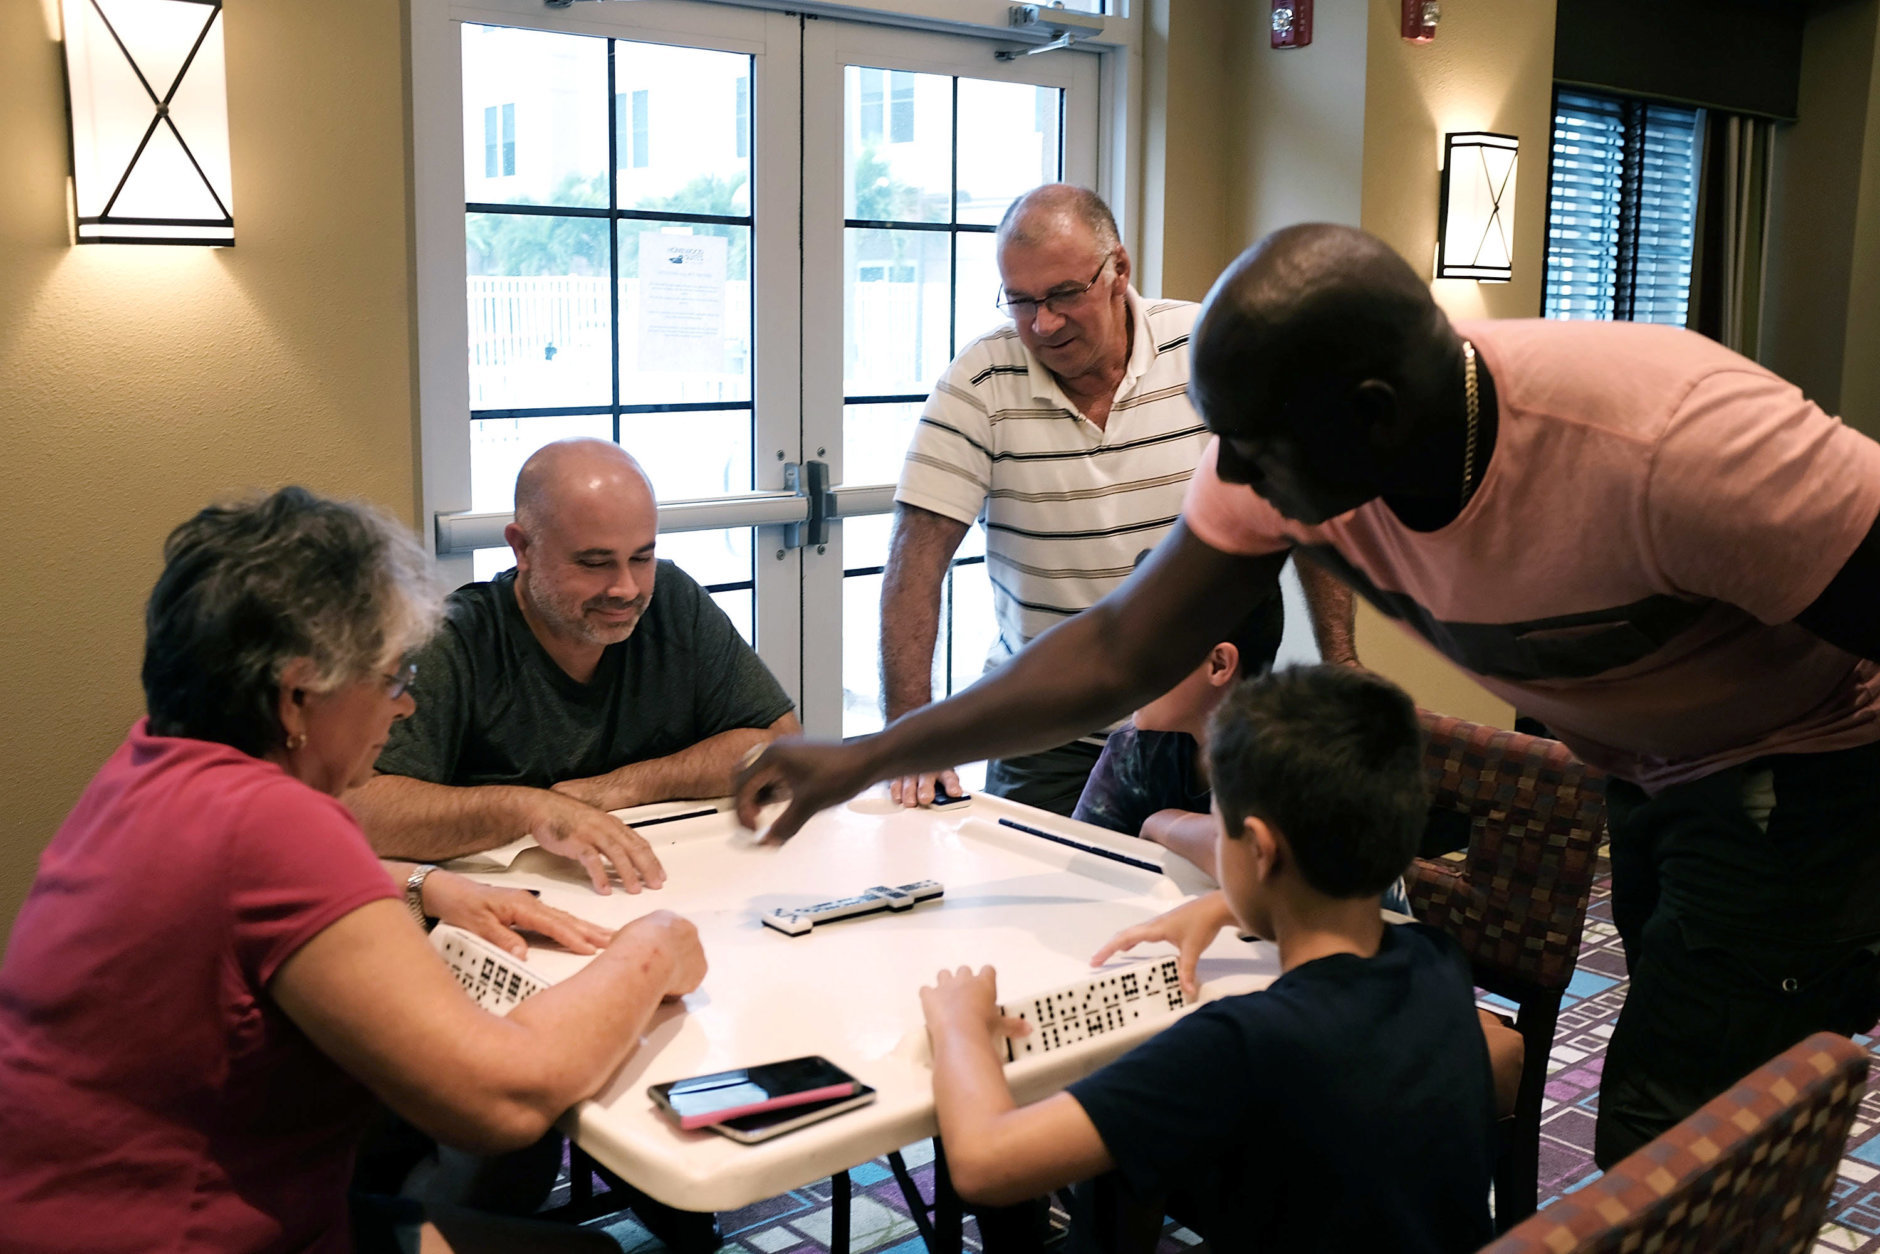 FORT MYERS, FL - SEPTEMBER 10: A family plays dominoes in a hotel as Hurricane Irma arrives into southwest Florida  on September 10, 2017 in Fort Myers, Florida. With businesses closed, thousands in shelters and a mandatory evacuation in coastal communities, the Fort Myers area is preparing for a possibly catastrophic storm.  (Photo by Spencer Platt/Getty Images)